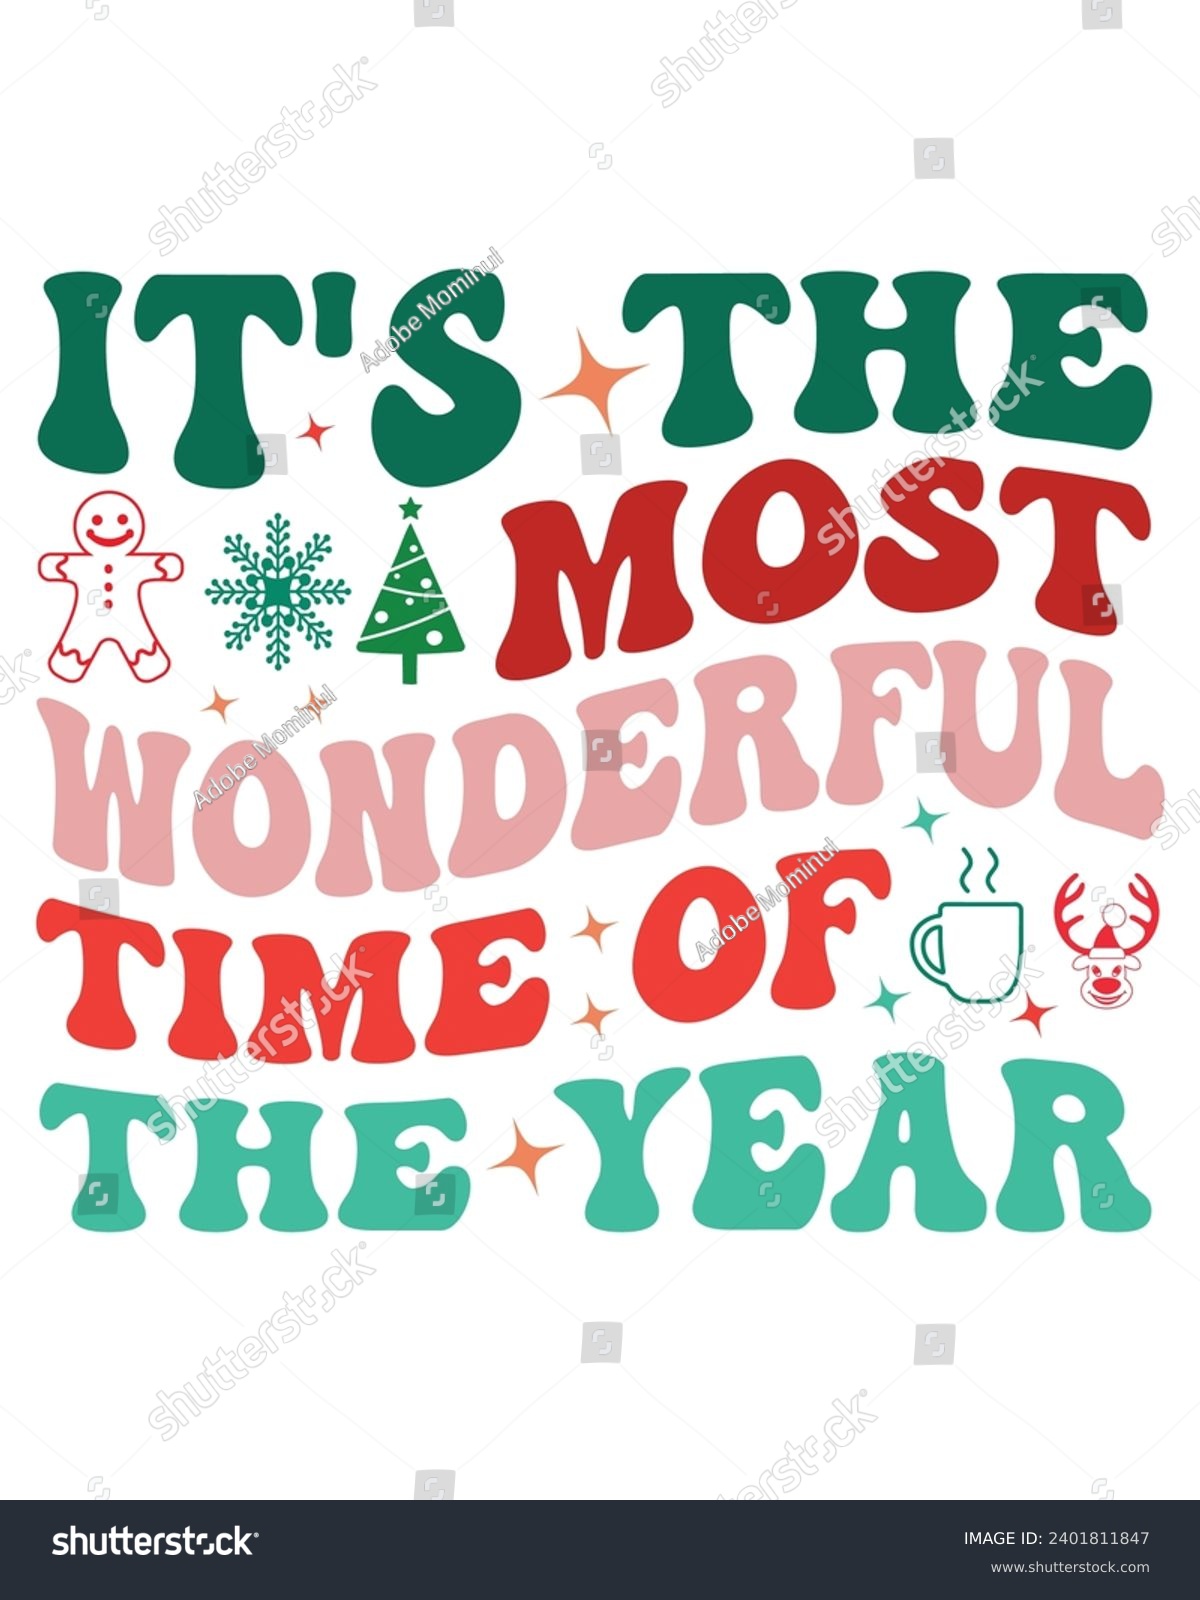 SVG of it's the most wonderful time of the year Retro Svg,Christmas Saying,Retro Christmas T-shirt, Funny Christmas Quotes, Merry Christmas Saying,Holiday Saying, New Year Quotes, Winter Quotes  svg